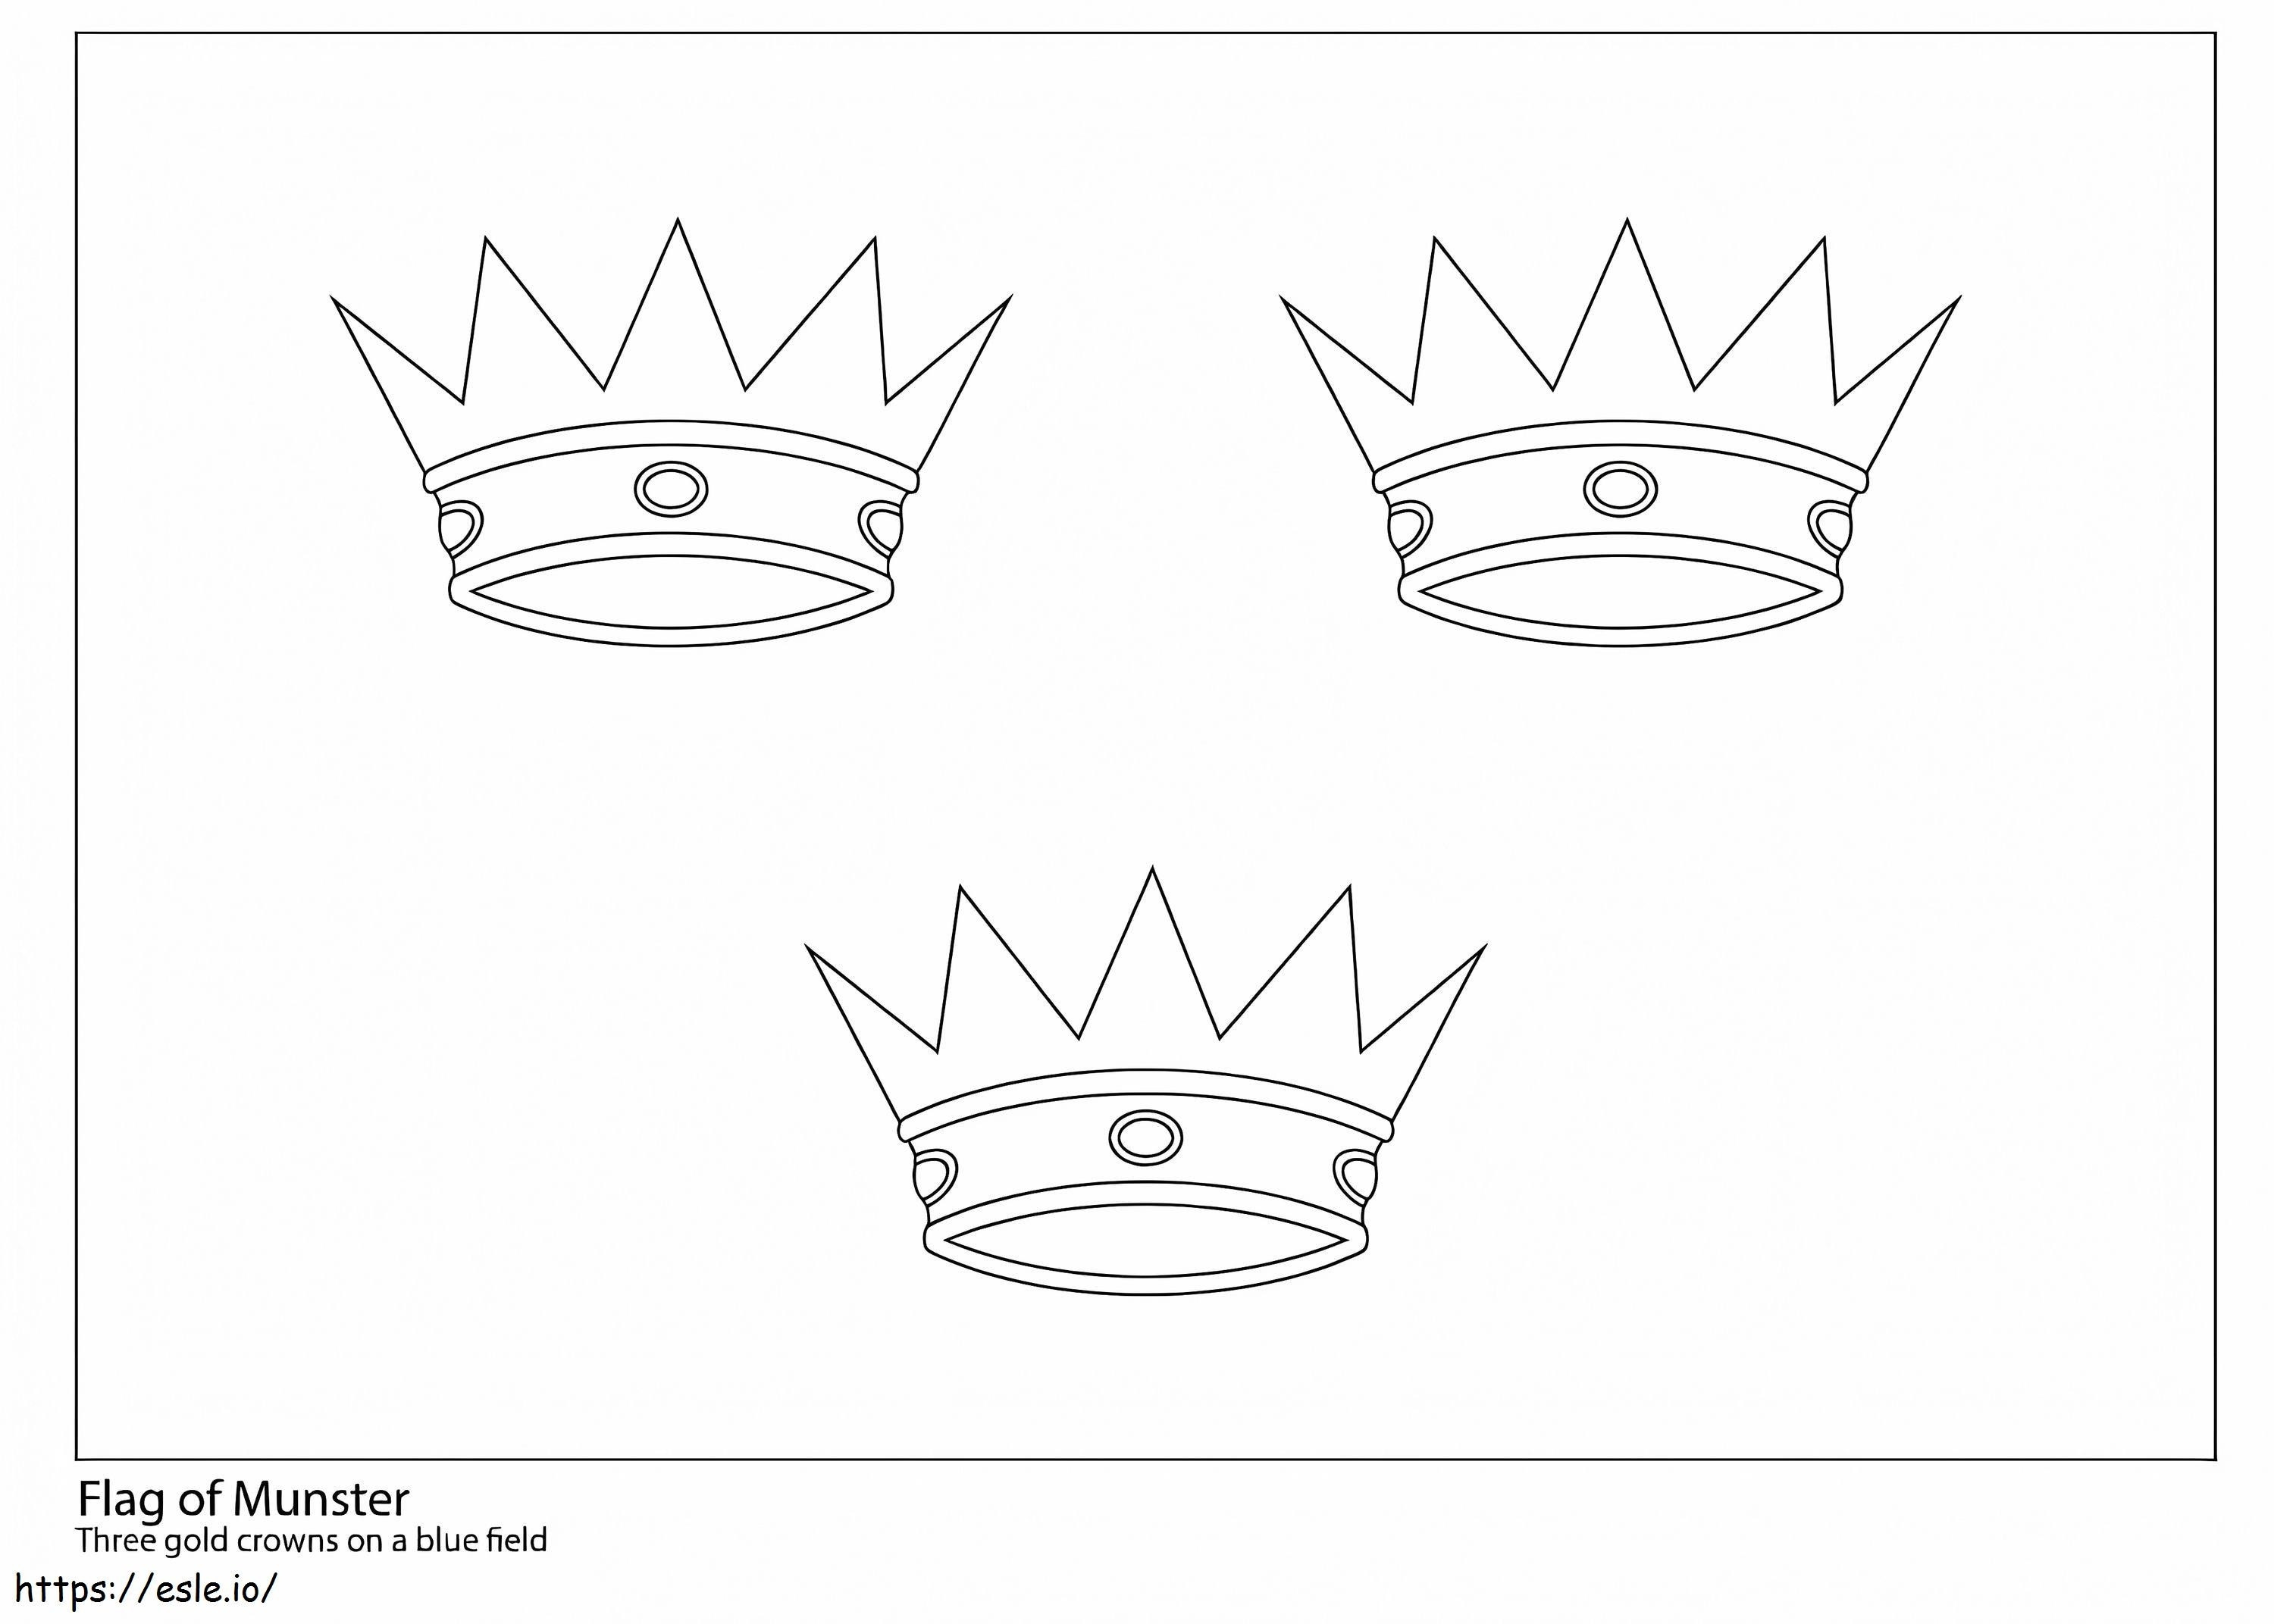 Munster Flag coloring page